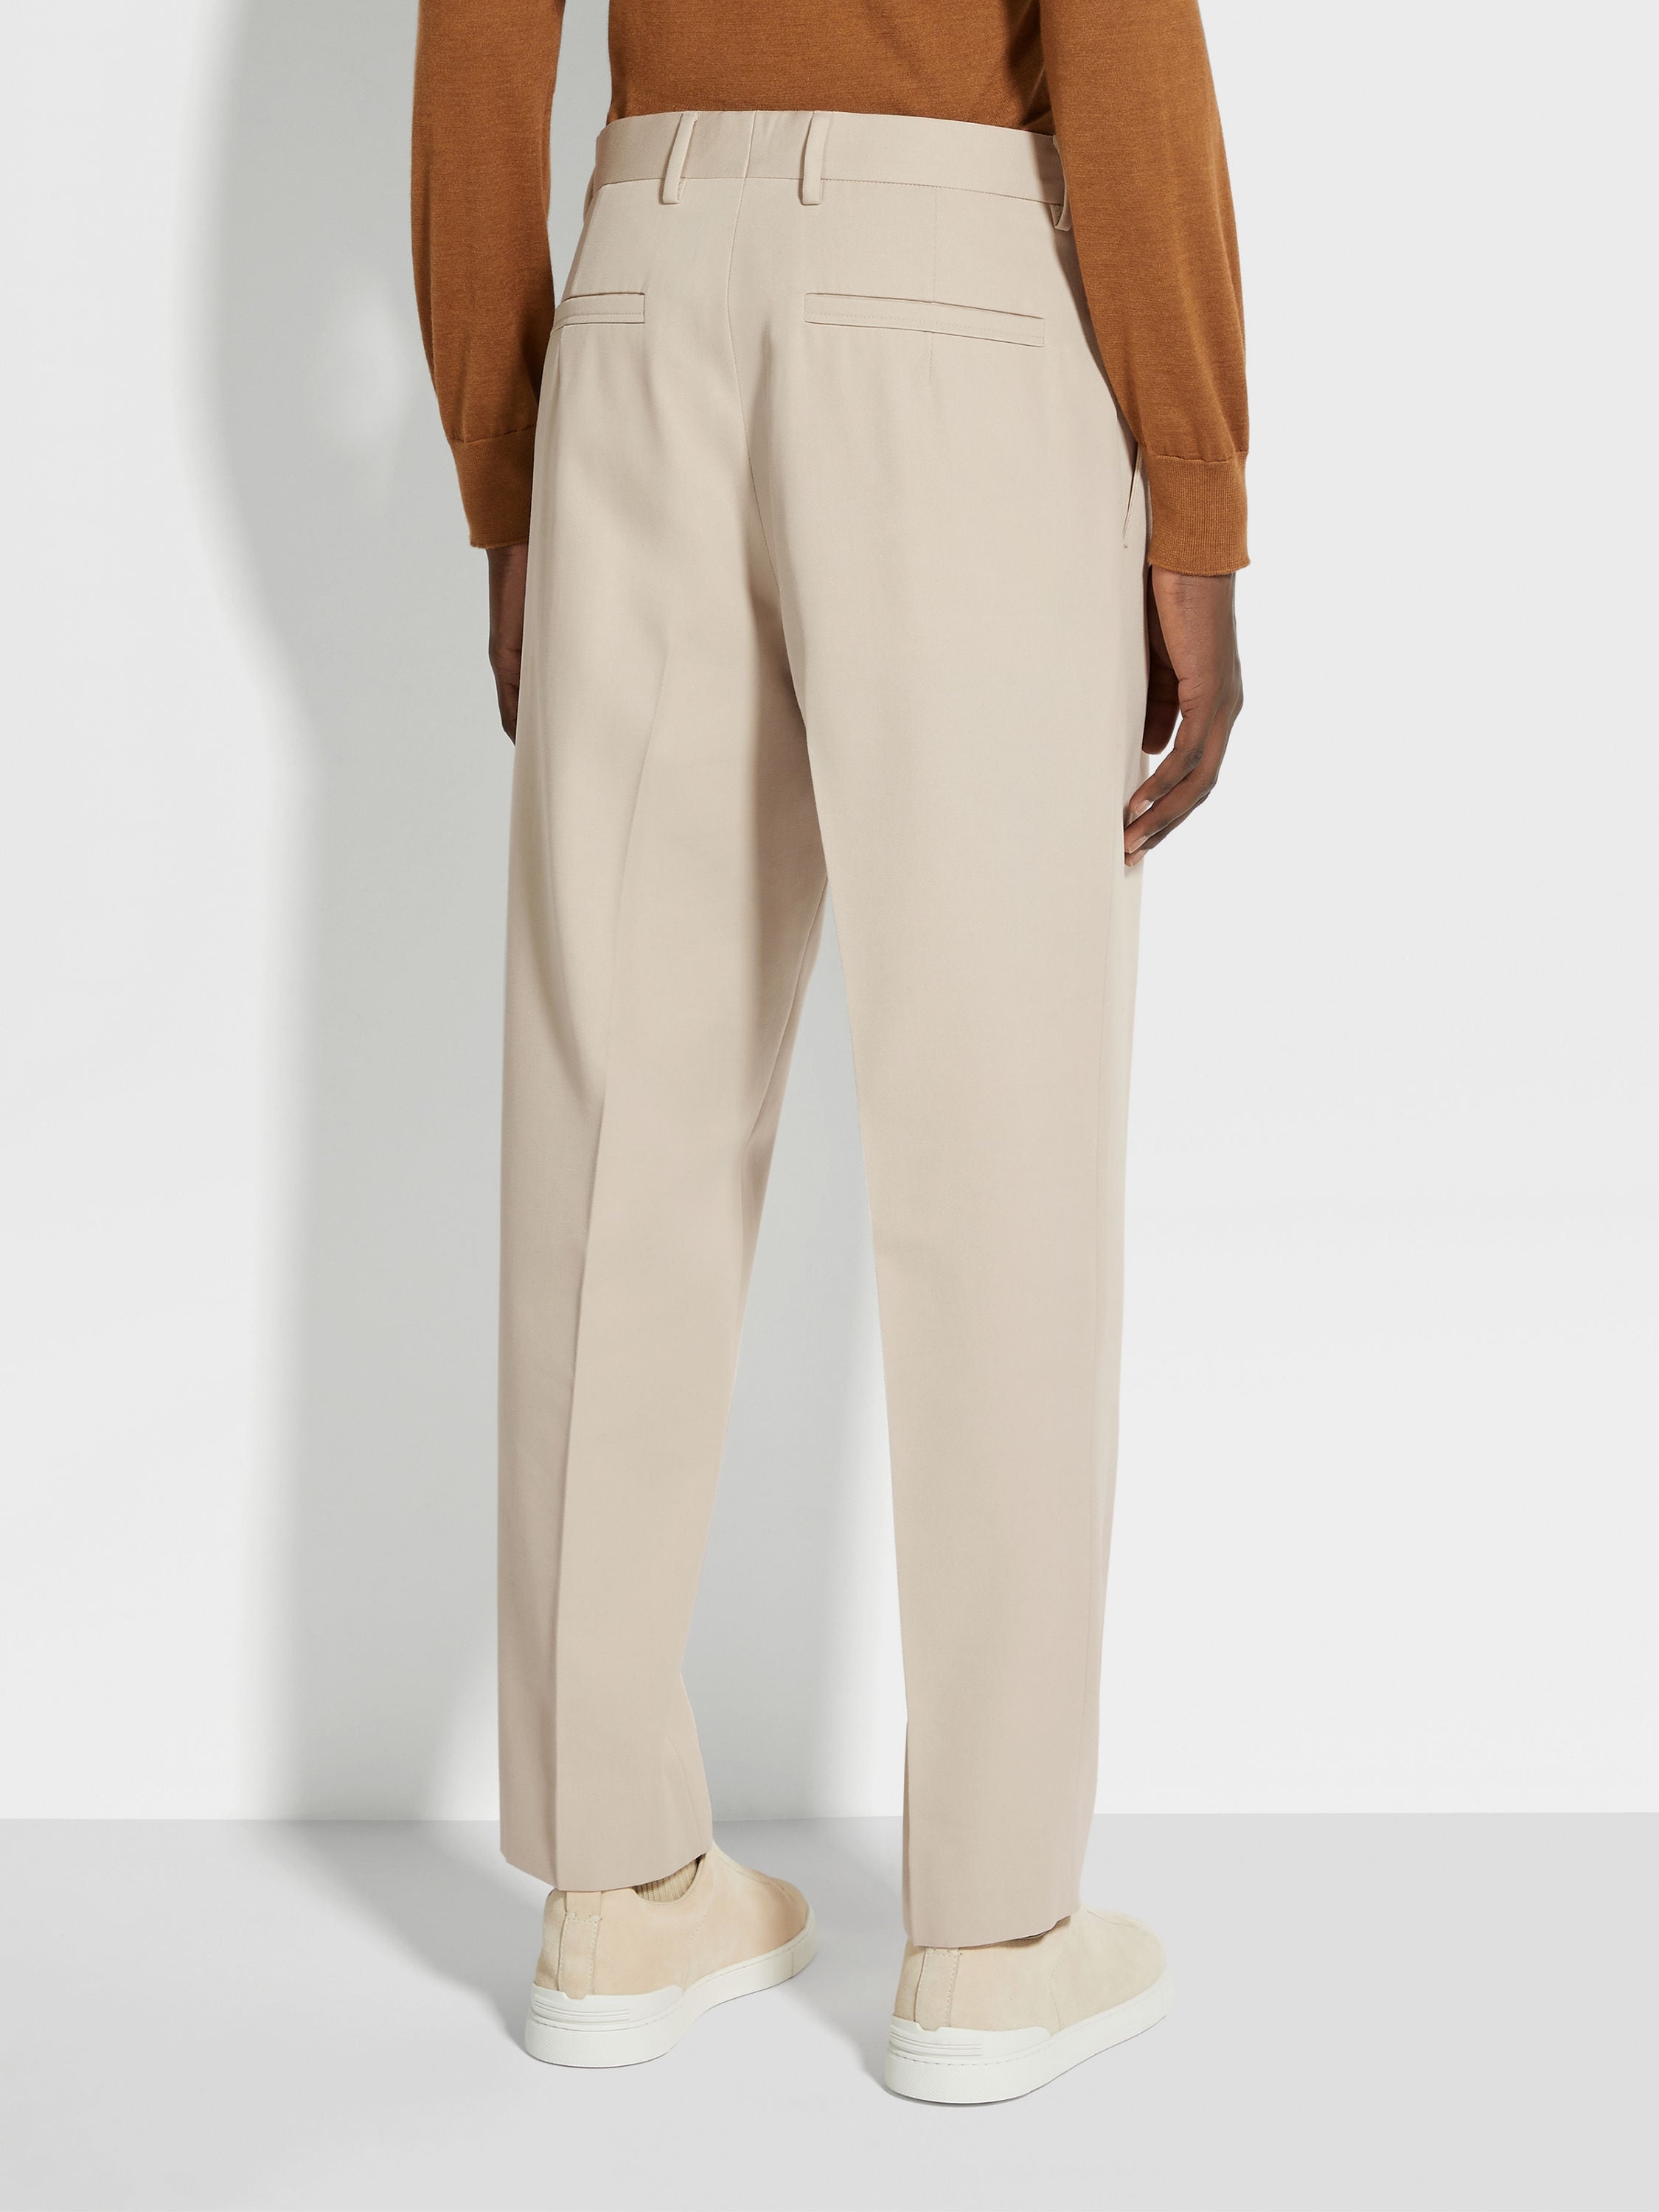 LIGHT BEIGE COTTON AND WOOL PANTS - 6